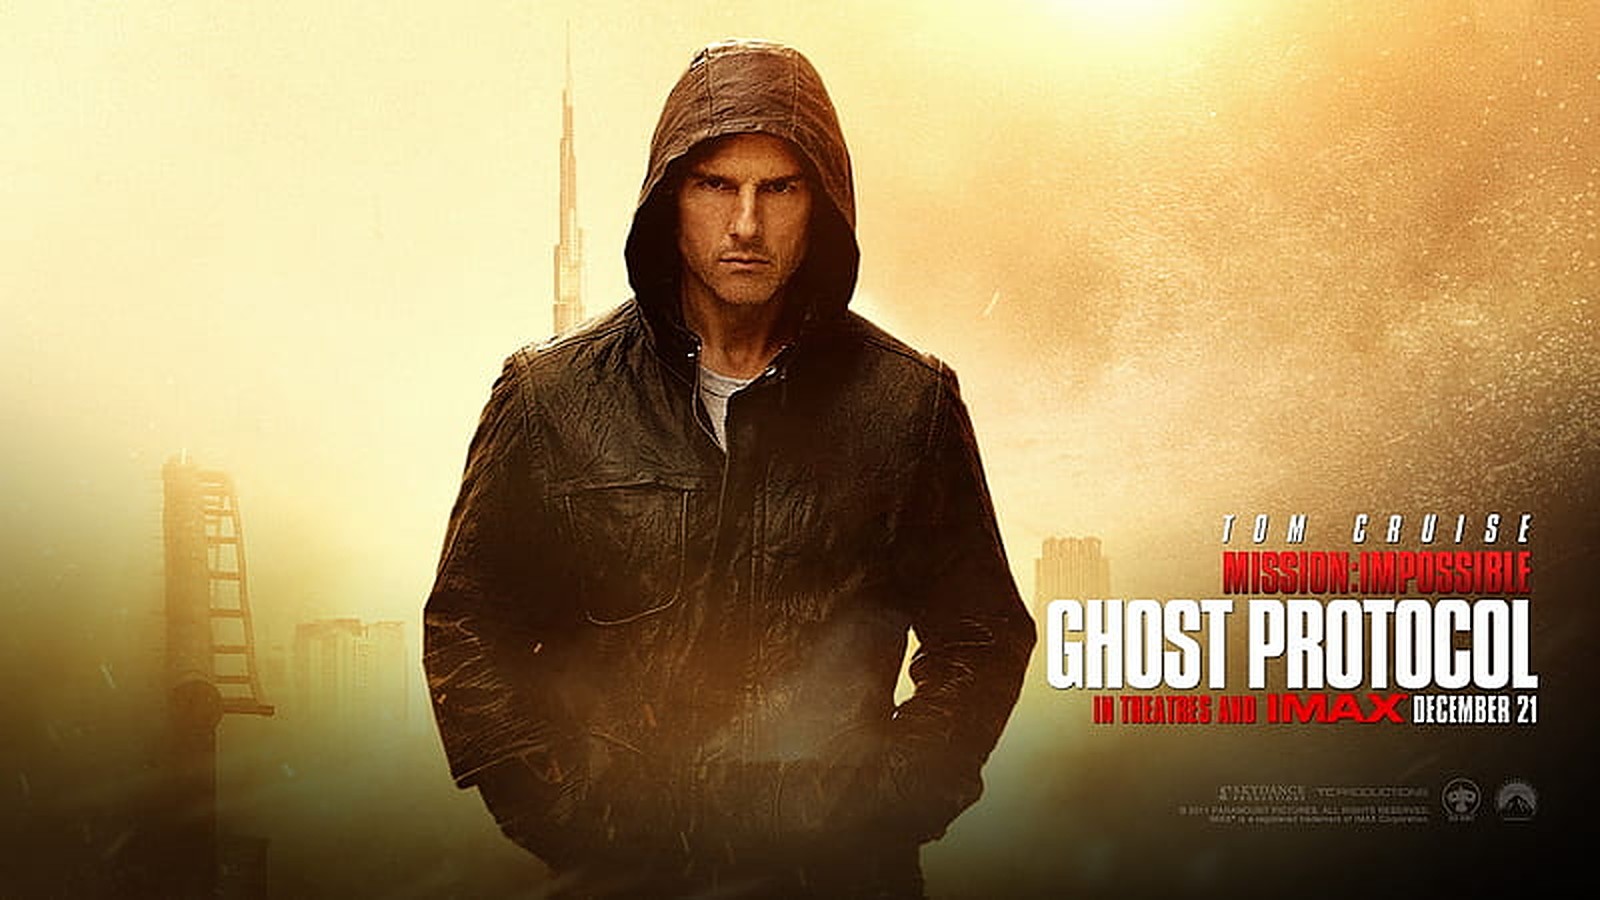 44-facts-about-the-movie-mission-impossible-ghost-protocol